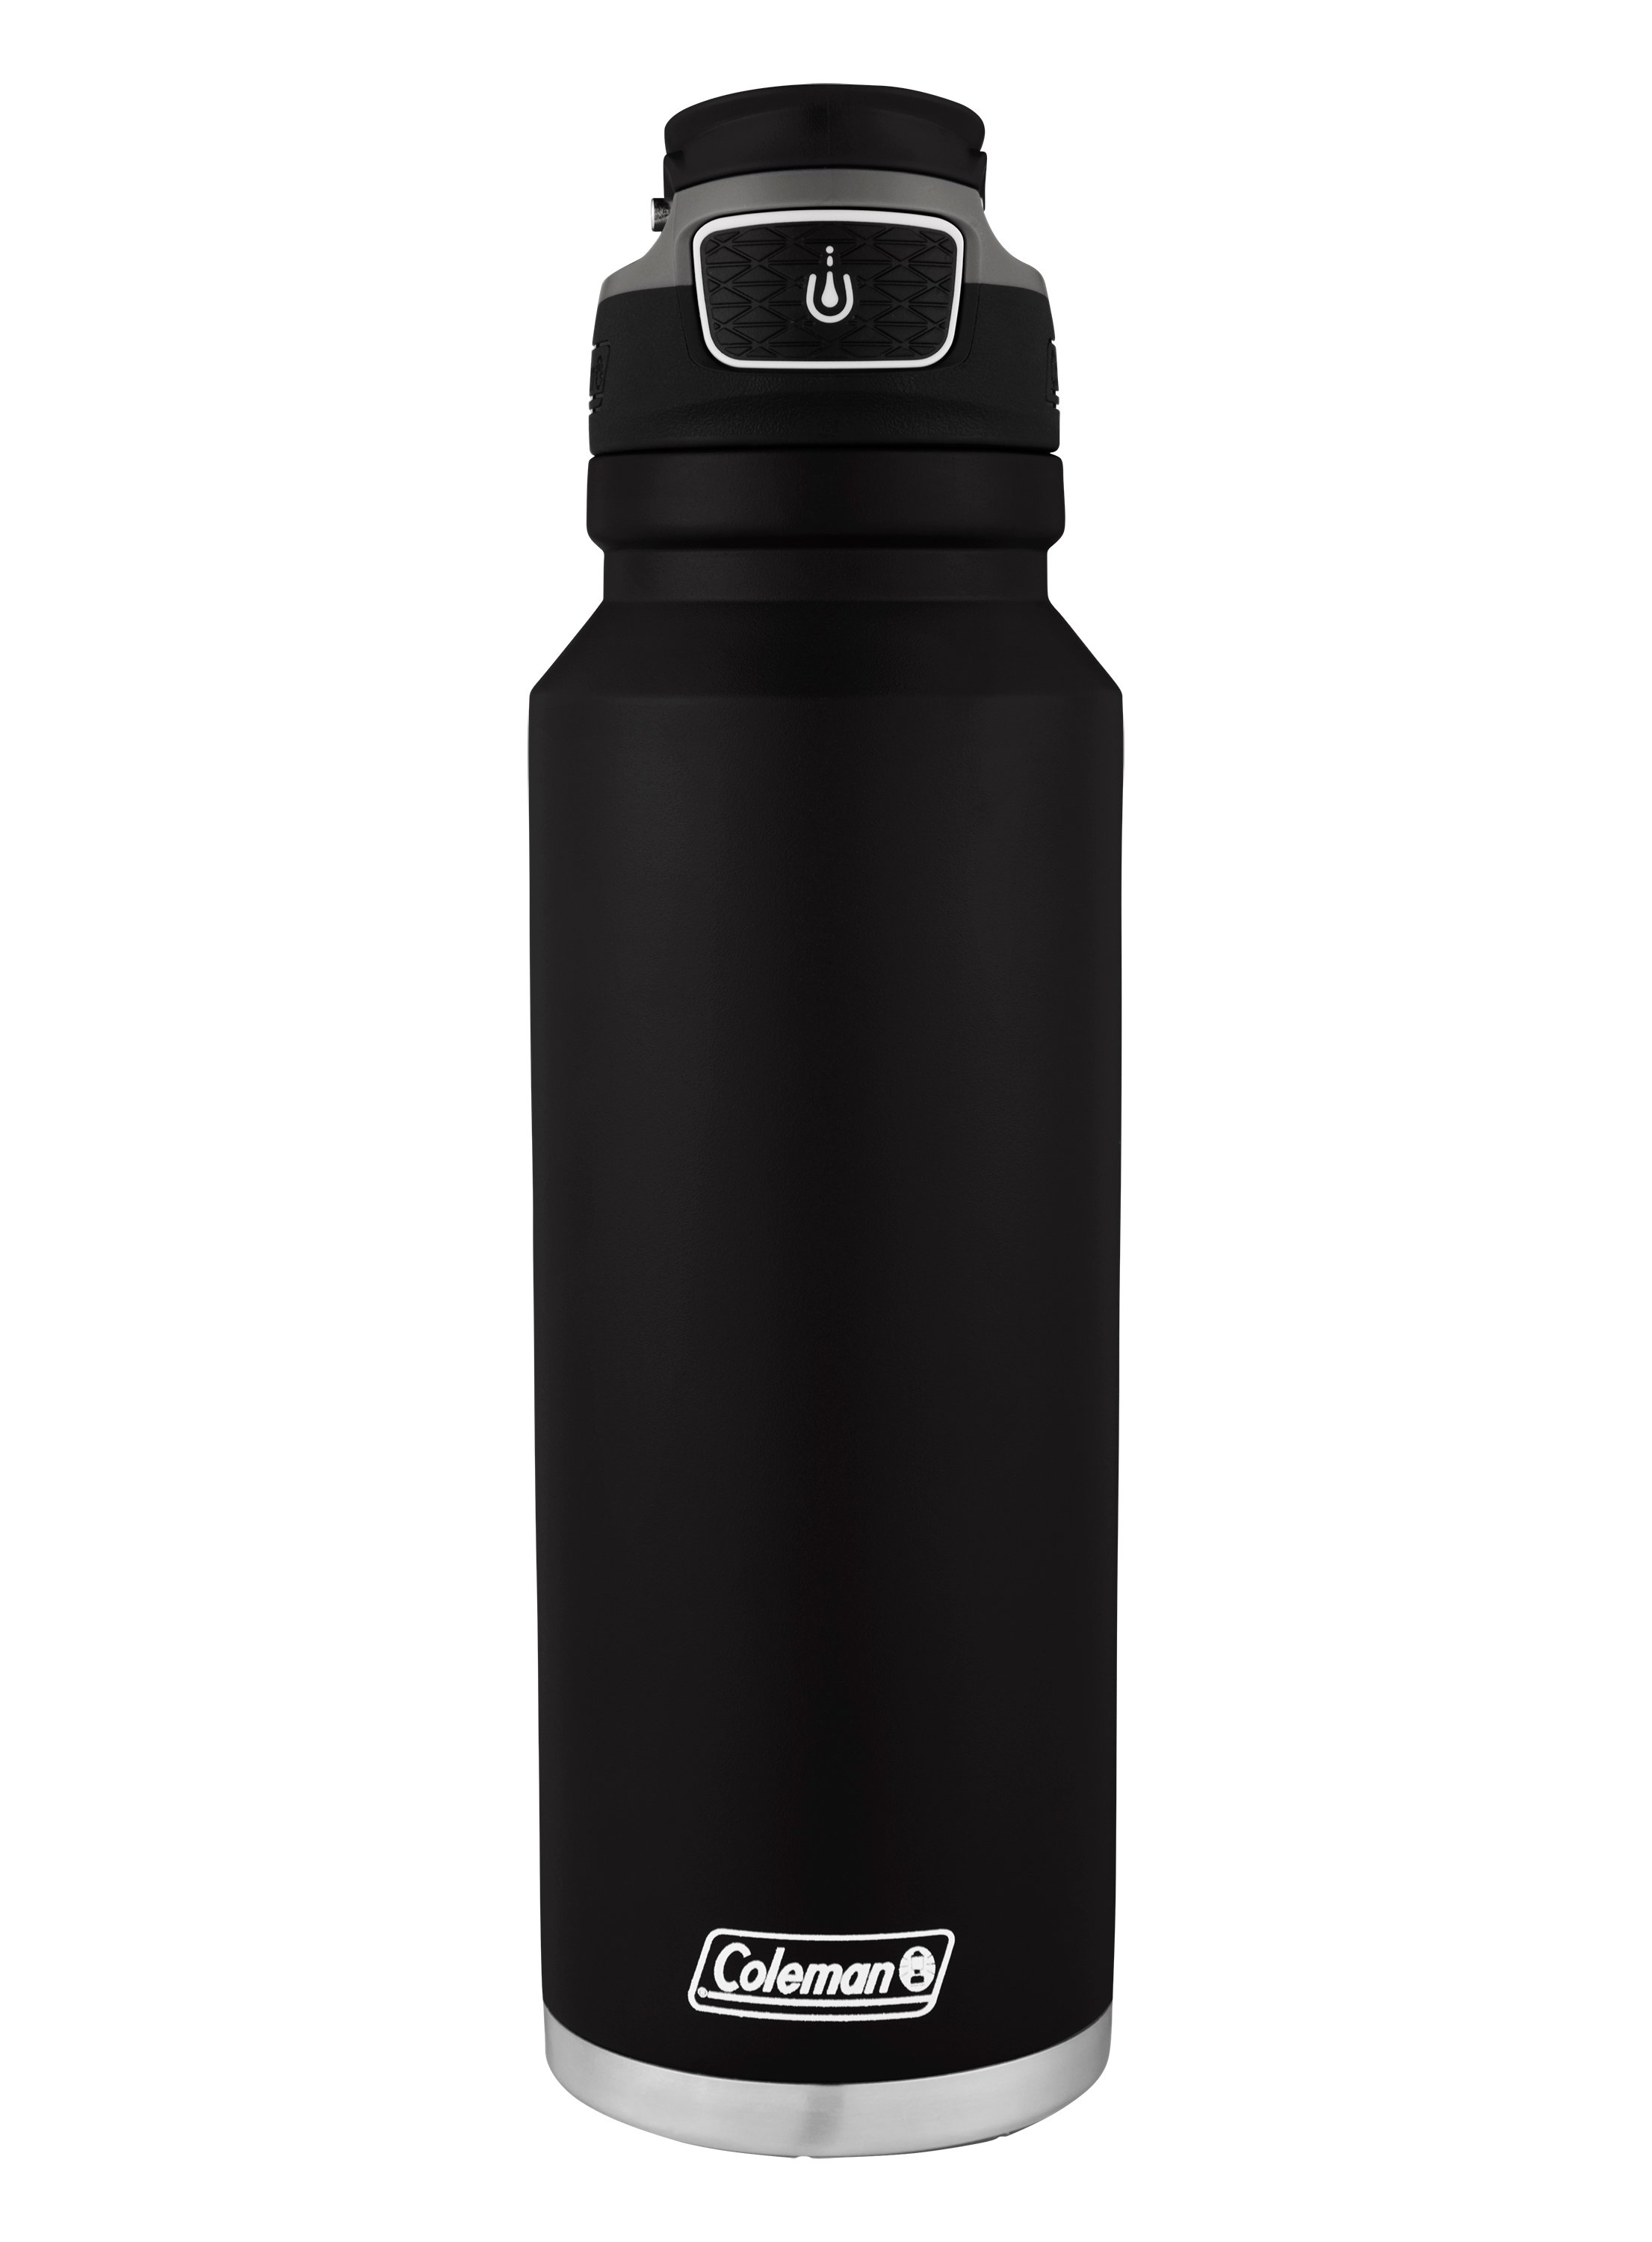 https://www.momjunction.com/wp-content/uploads/product-images/coleman-freeflow-autoseal-insulated-stainless-steel-water-bottle_afl515.jpg